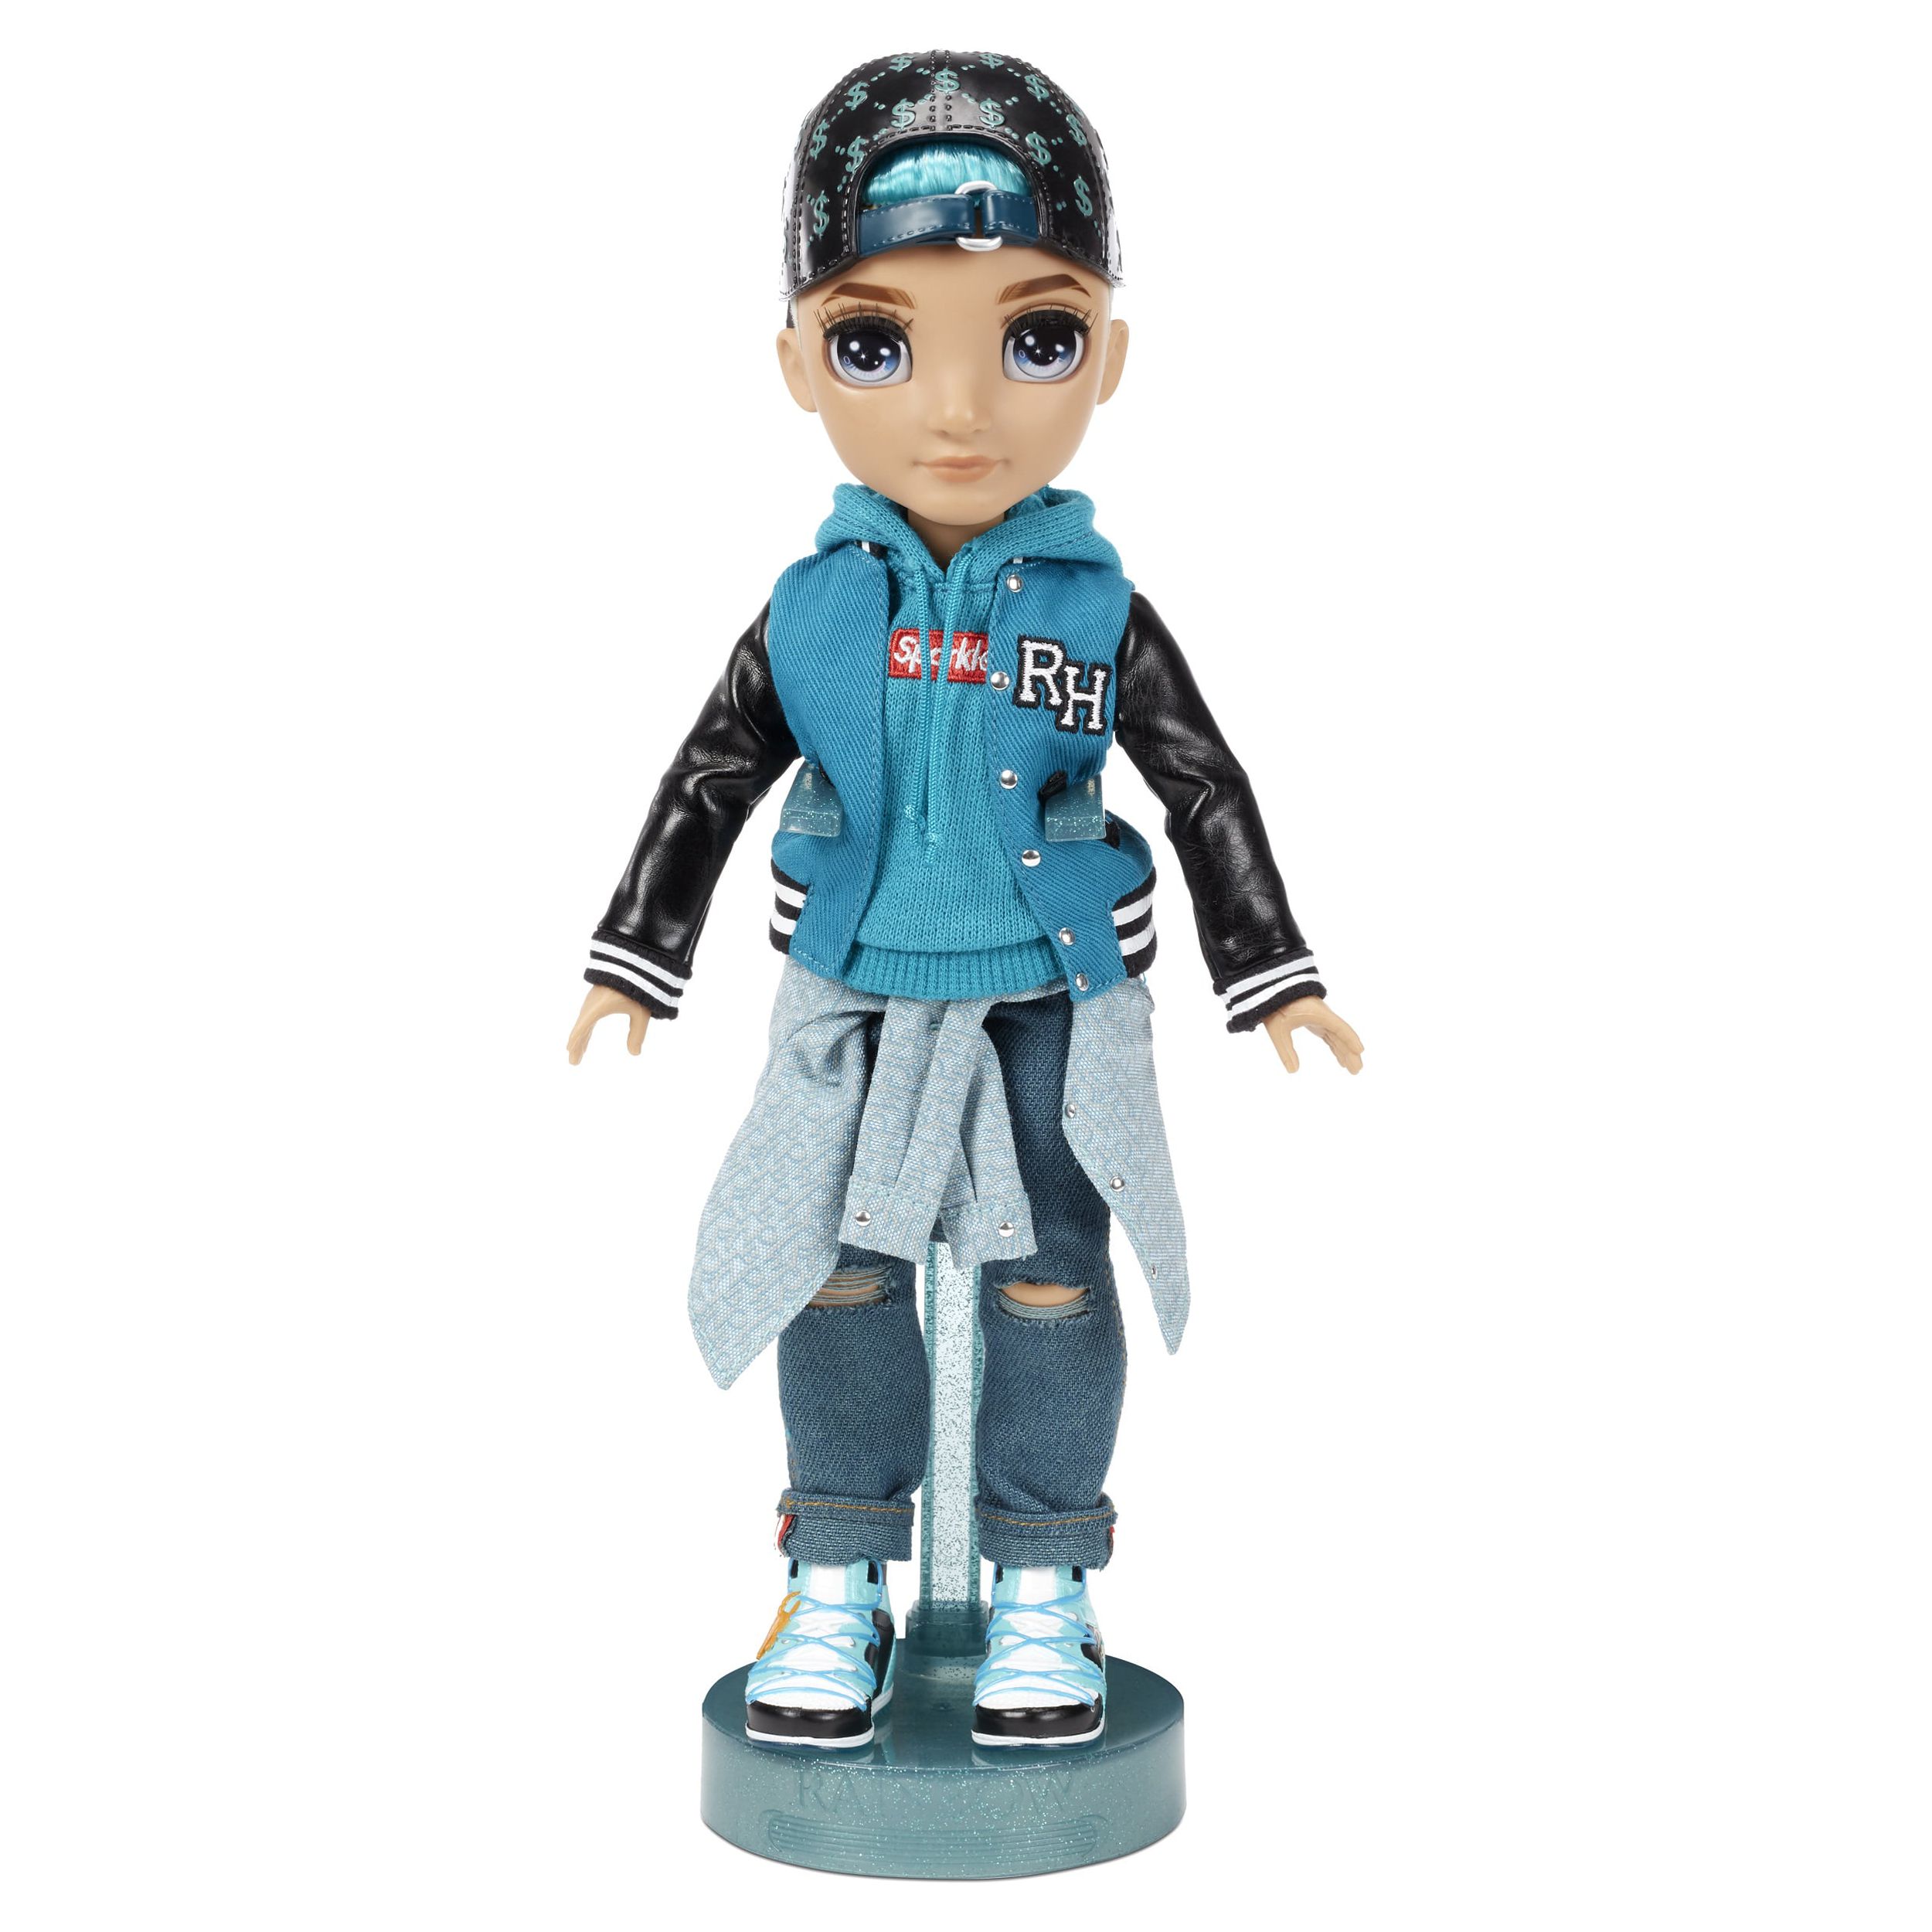 Rainbow High River Kendall – Teal Boy Fashion Doll with 2 Complete Mix & Match Outfits and Accessories, Toys for Kids 6-12 Years Old - image 4 of 7